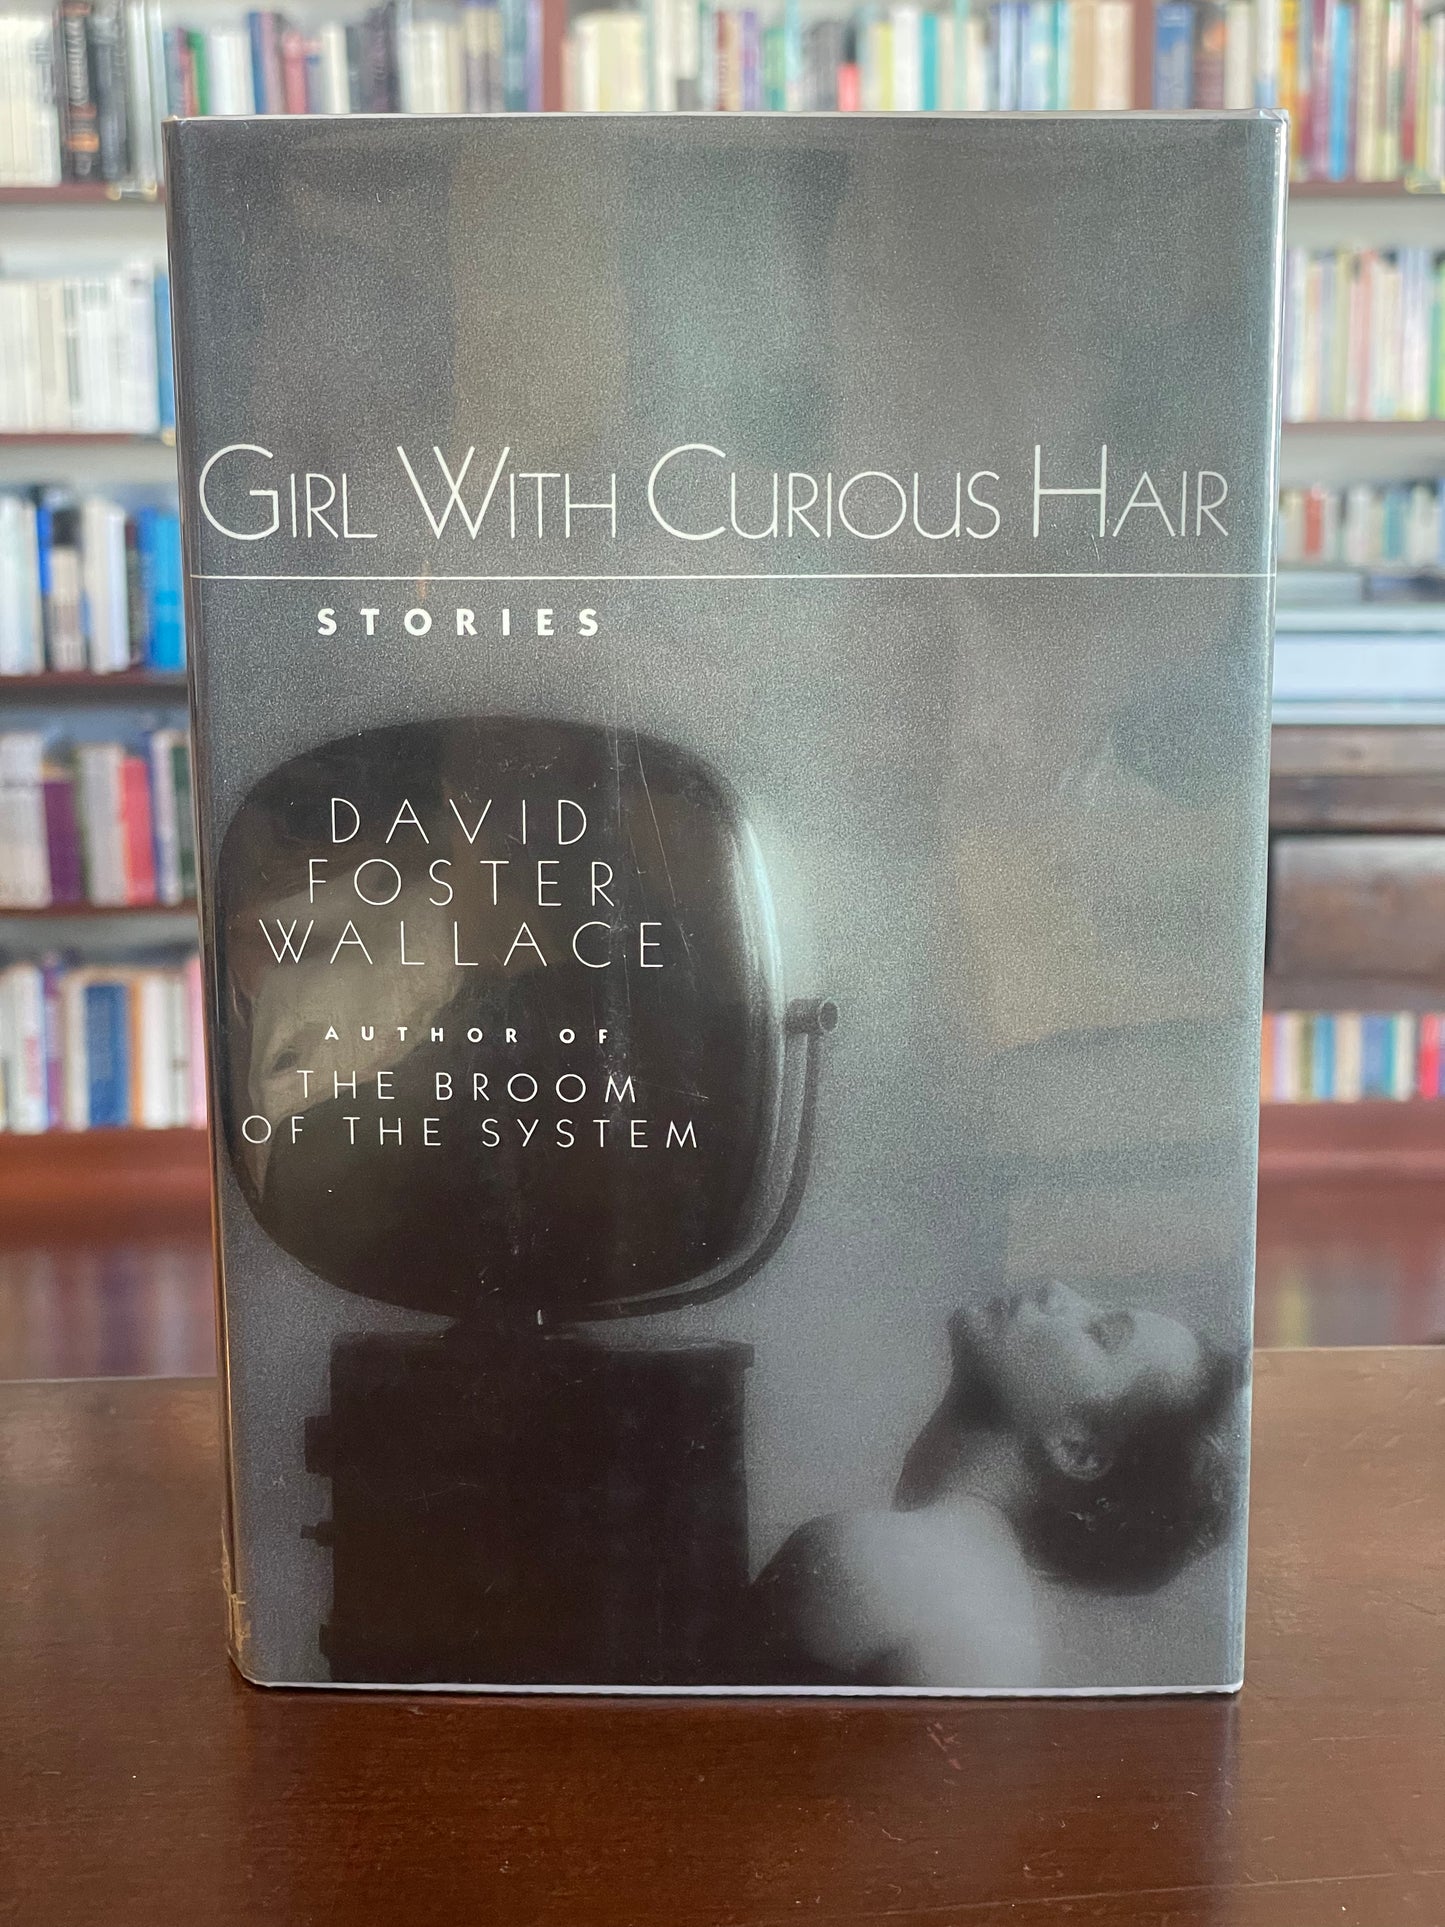 Girl With Curious Hair by David Foster Wallace (First Edition)